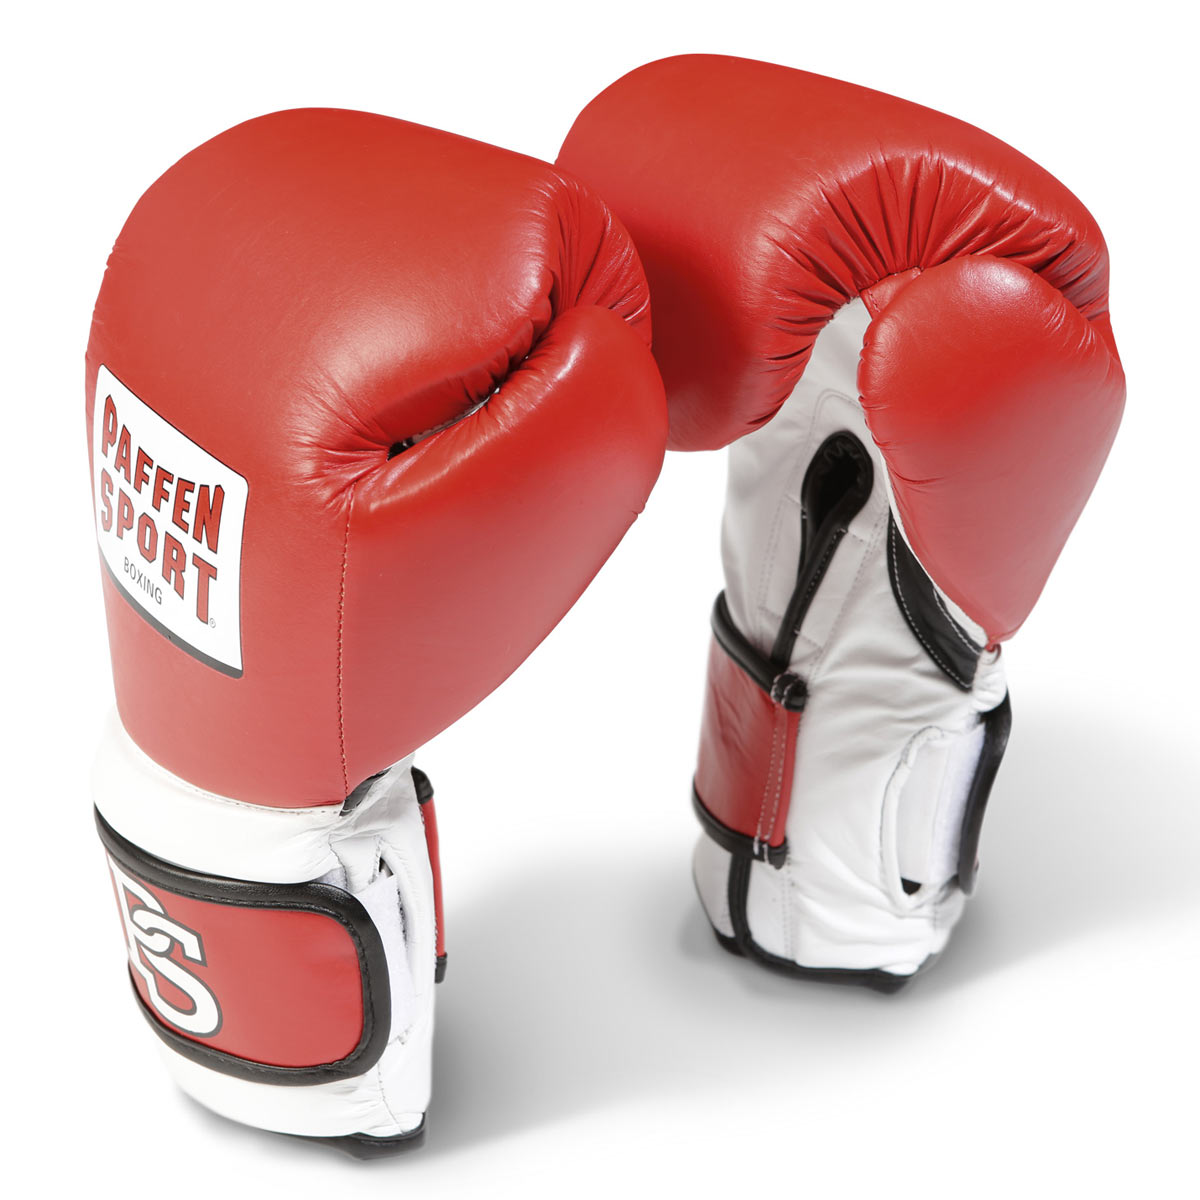 Paffen Sport Pro Performance Sparring Boxhandschuhe